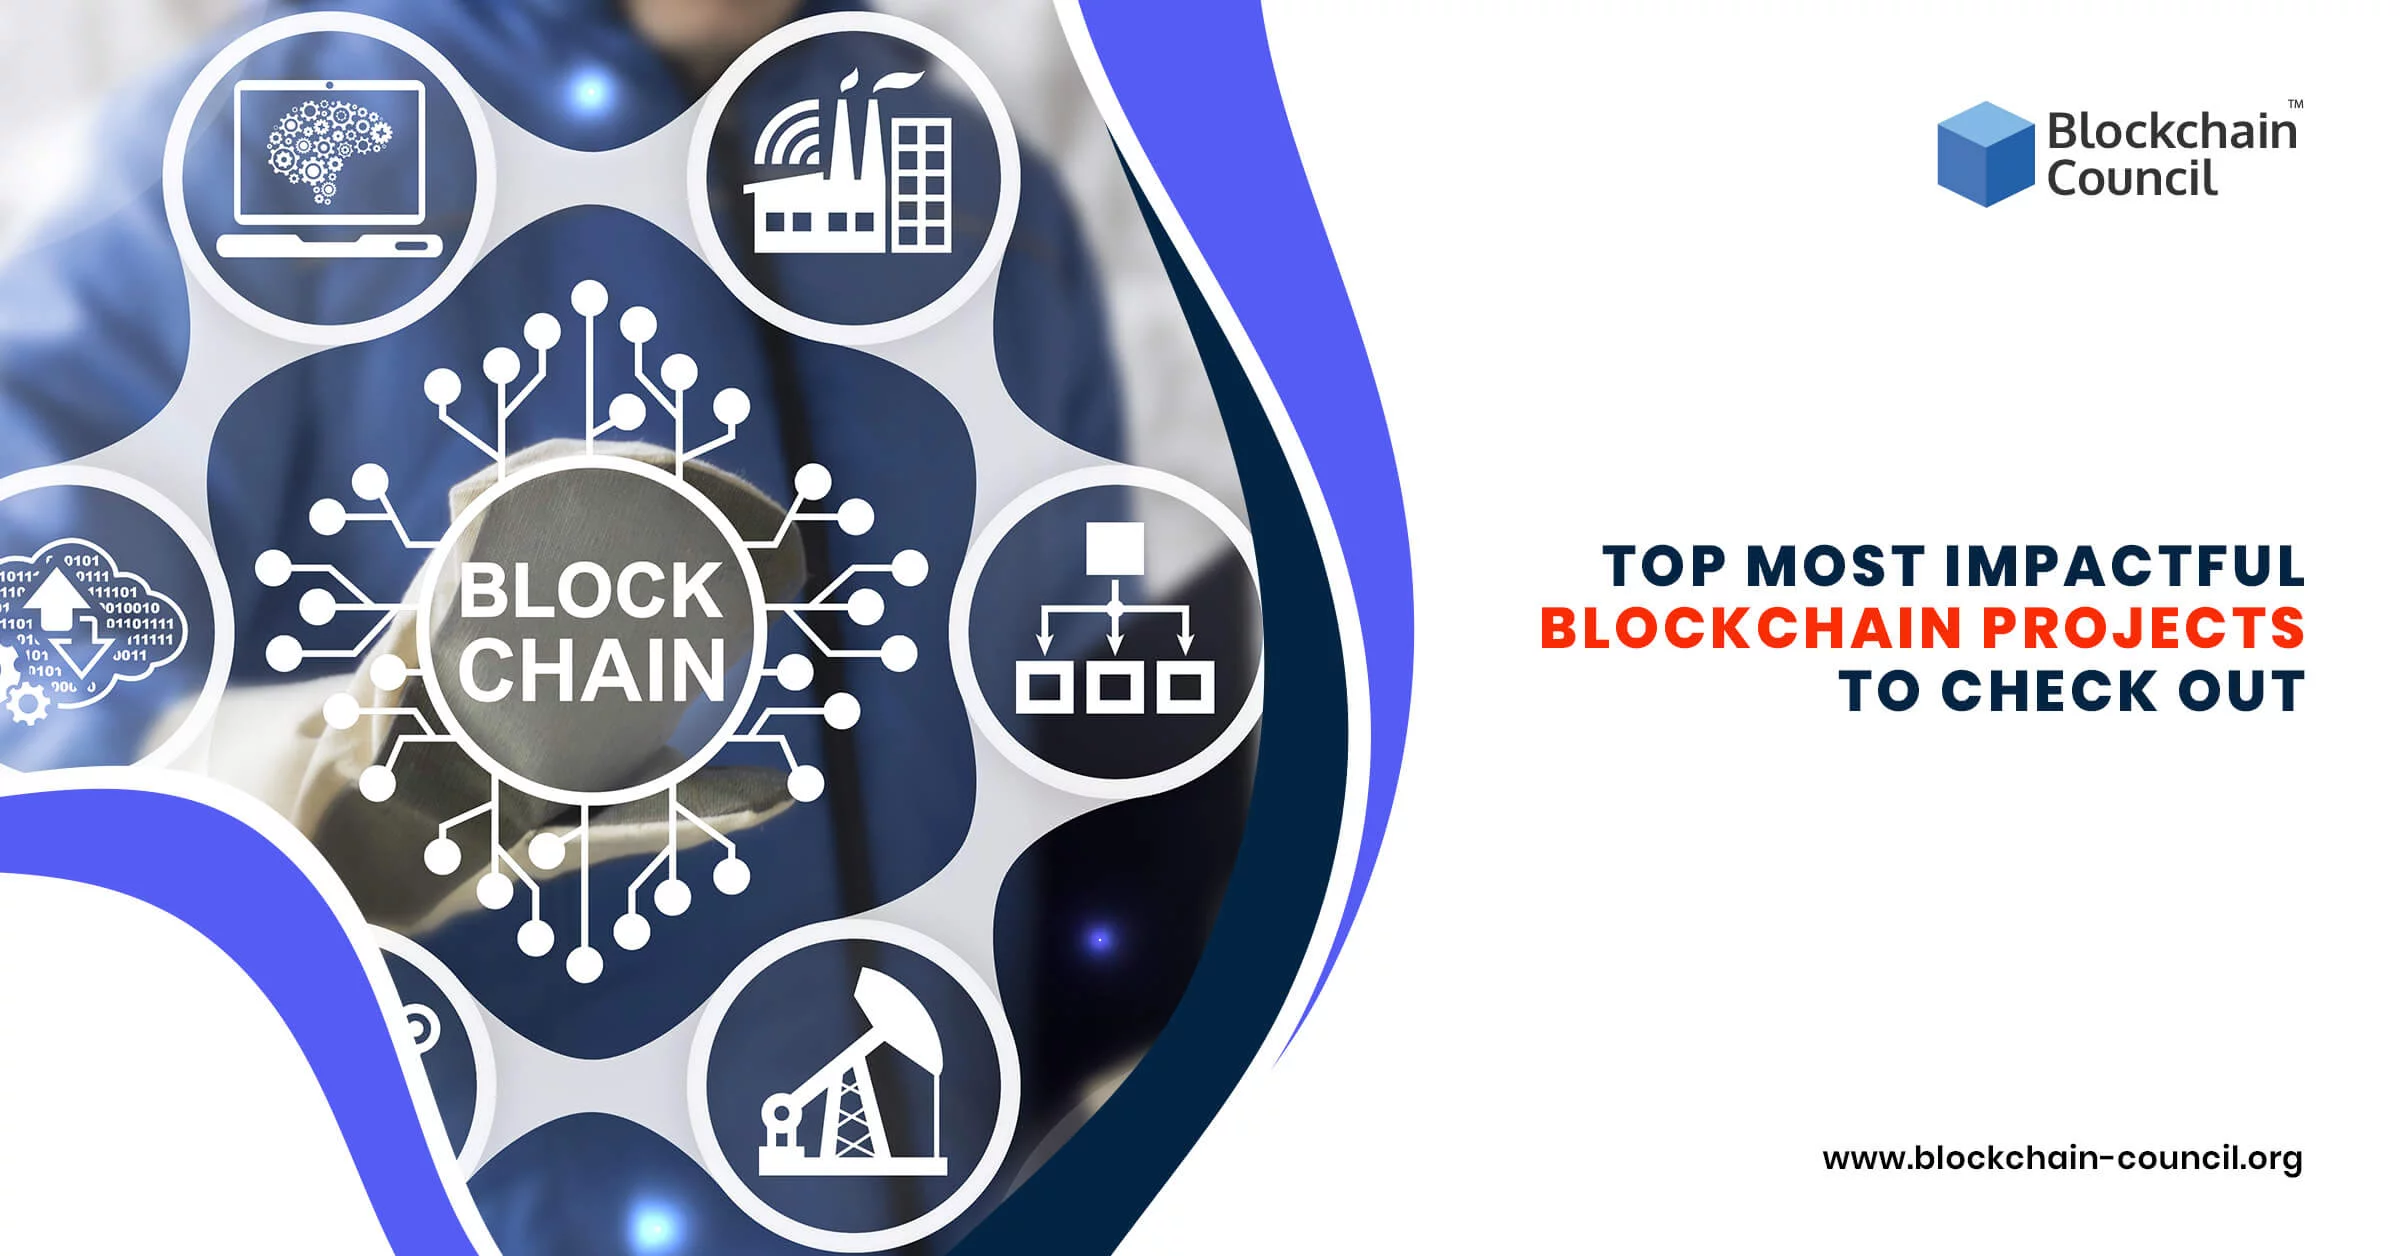 The Top Most Impactful Blockchain Projects to Check Out